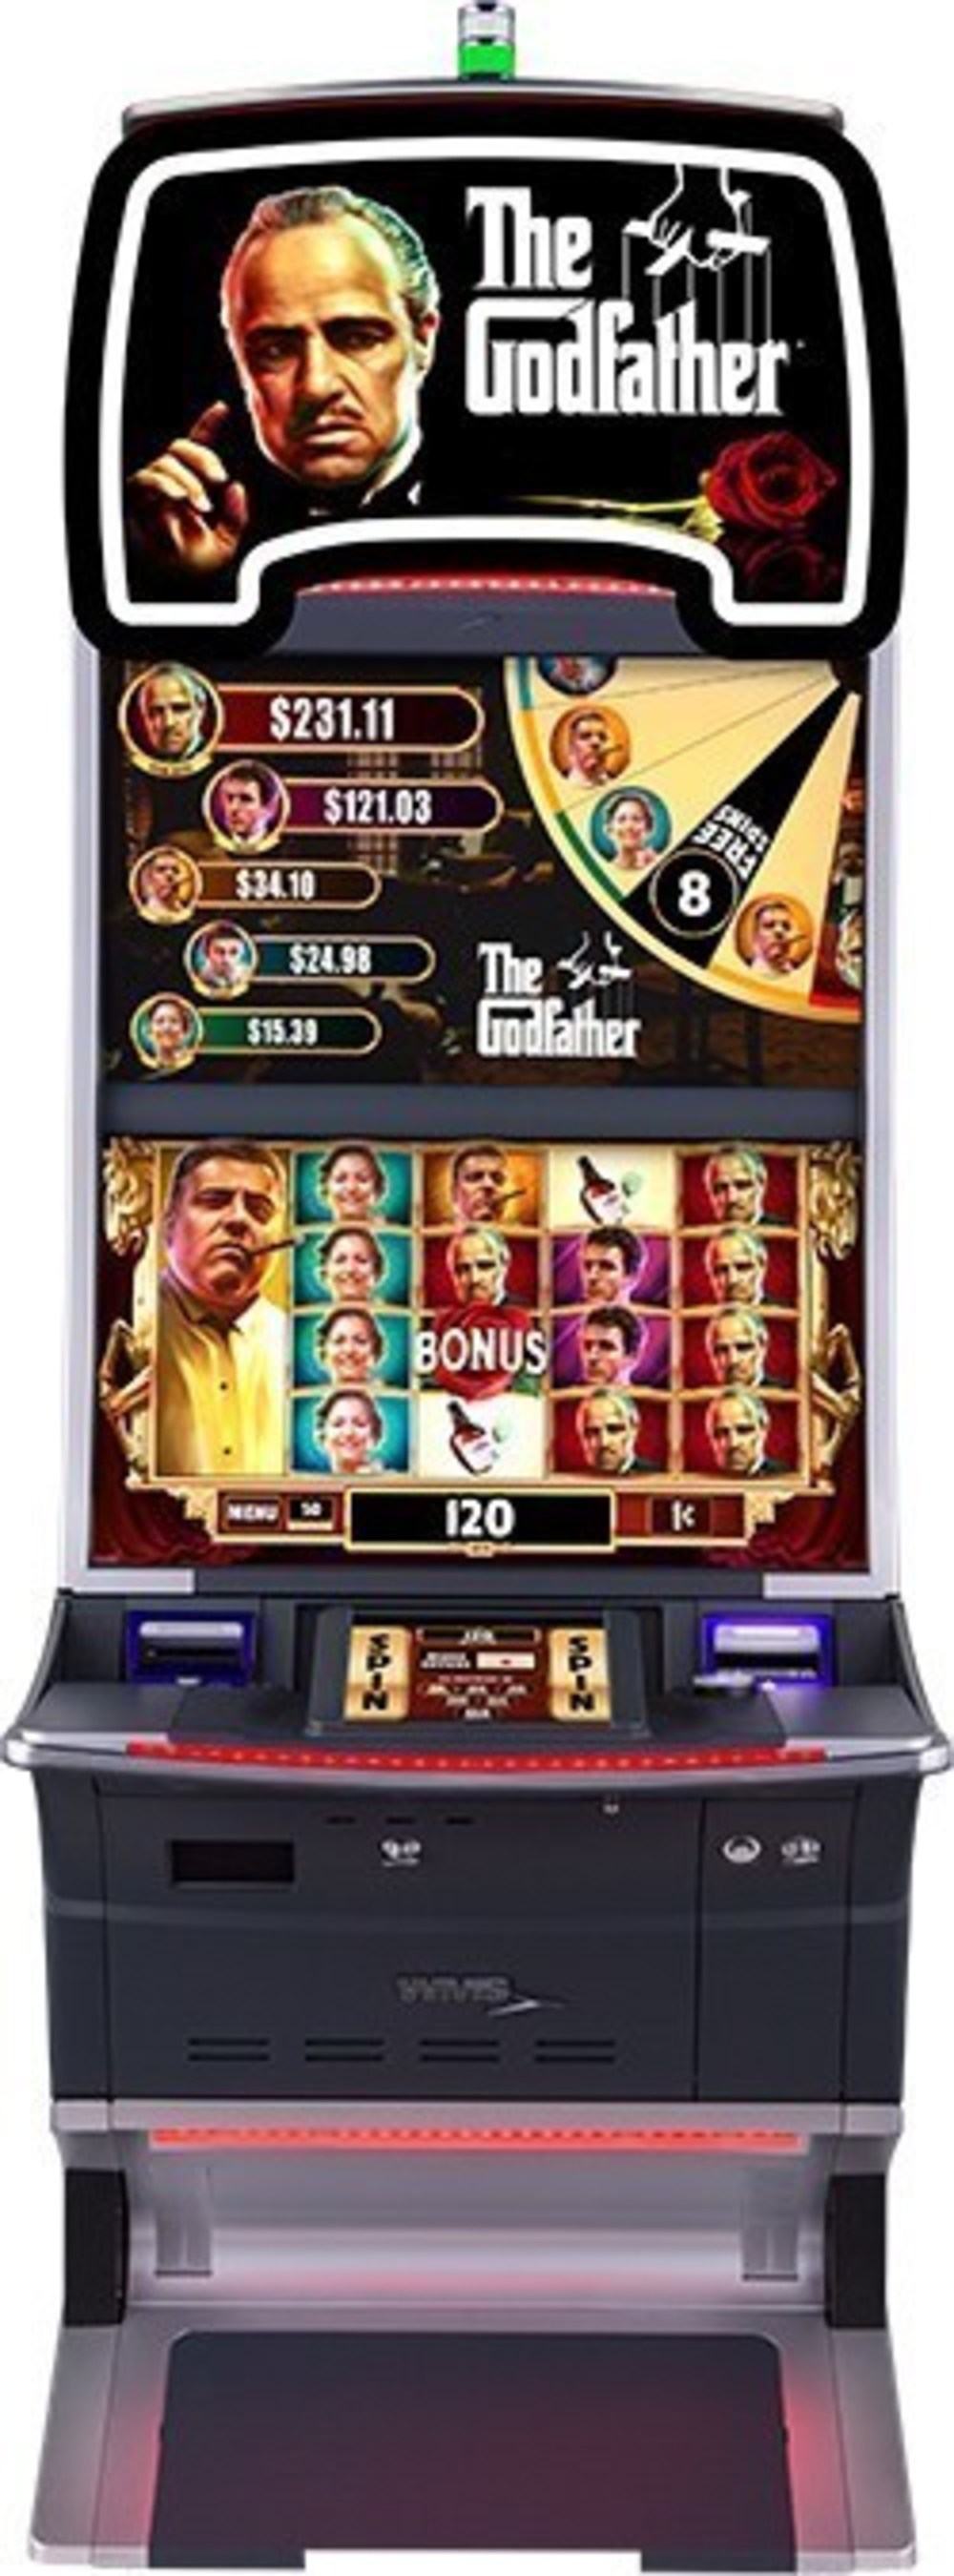 THE GODFATHER(R) theme on the s32 cabinet offers free spins with double the lines, a five-level near-area progressive jackpot feature and random character symbols that award character upgrades, respins, multipliers, or more credits.